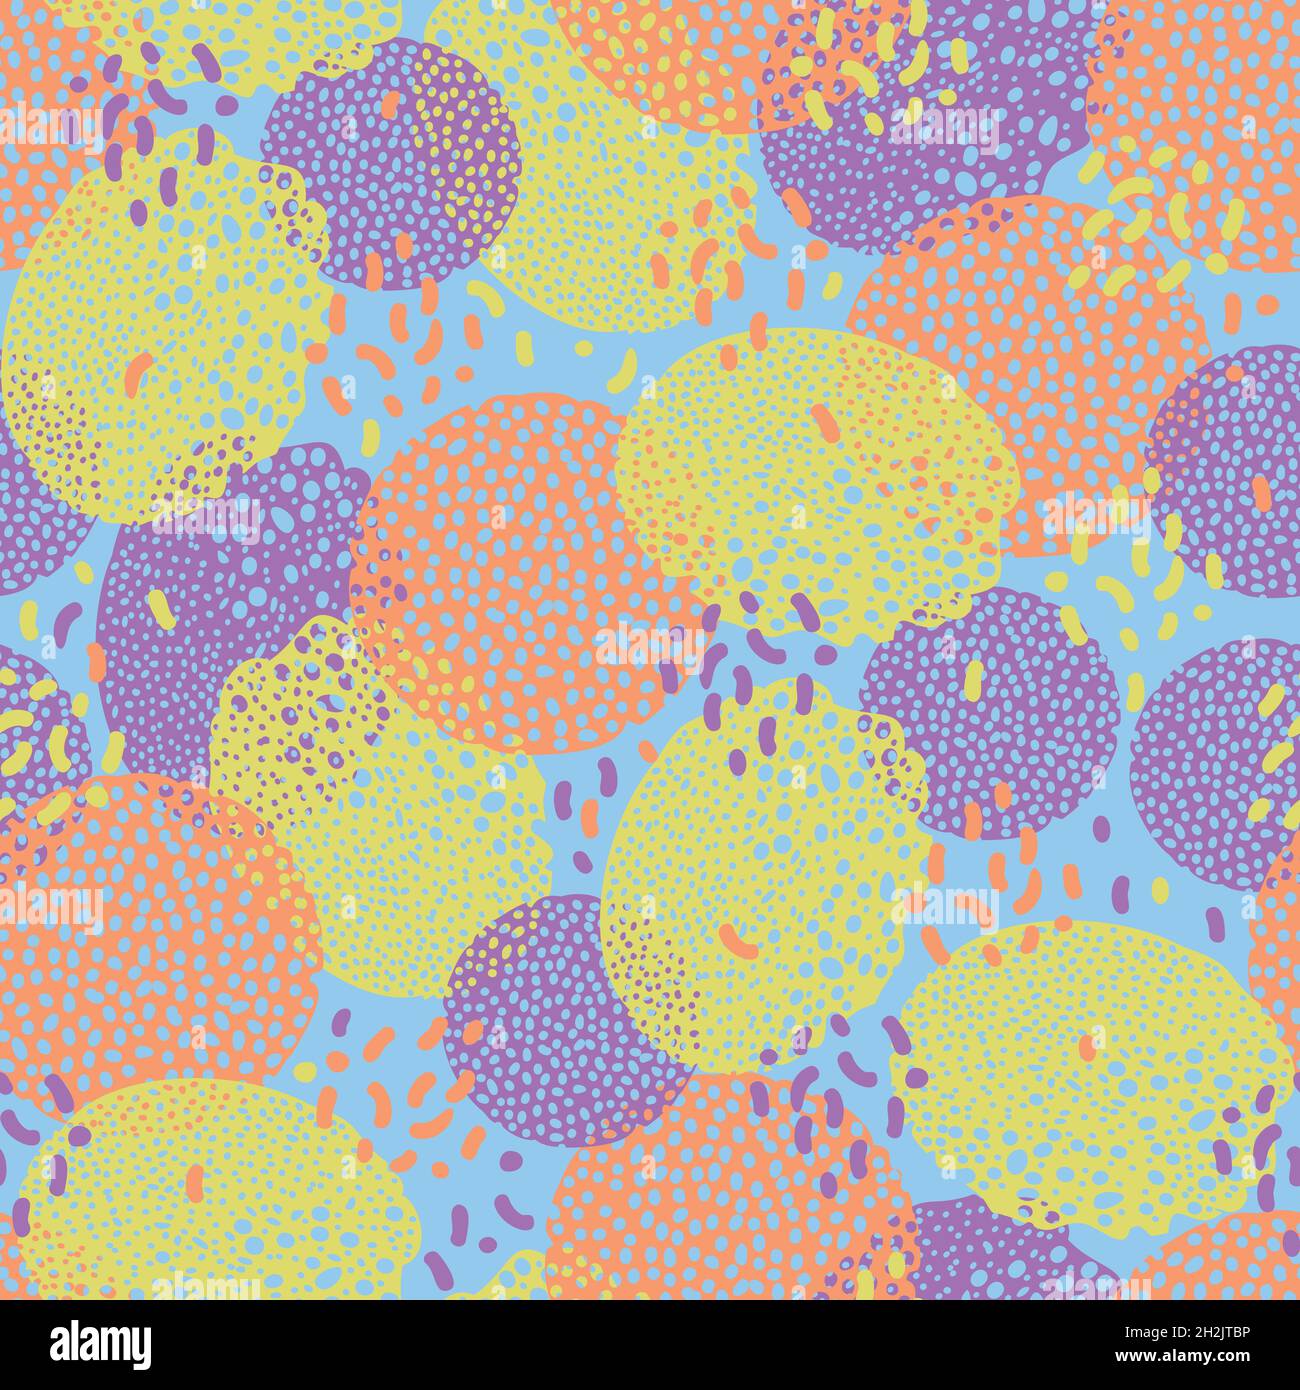 Vector seamless pattern with perforated circles and spots. Abstract background. Stock Vector